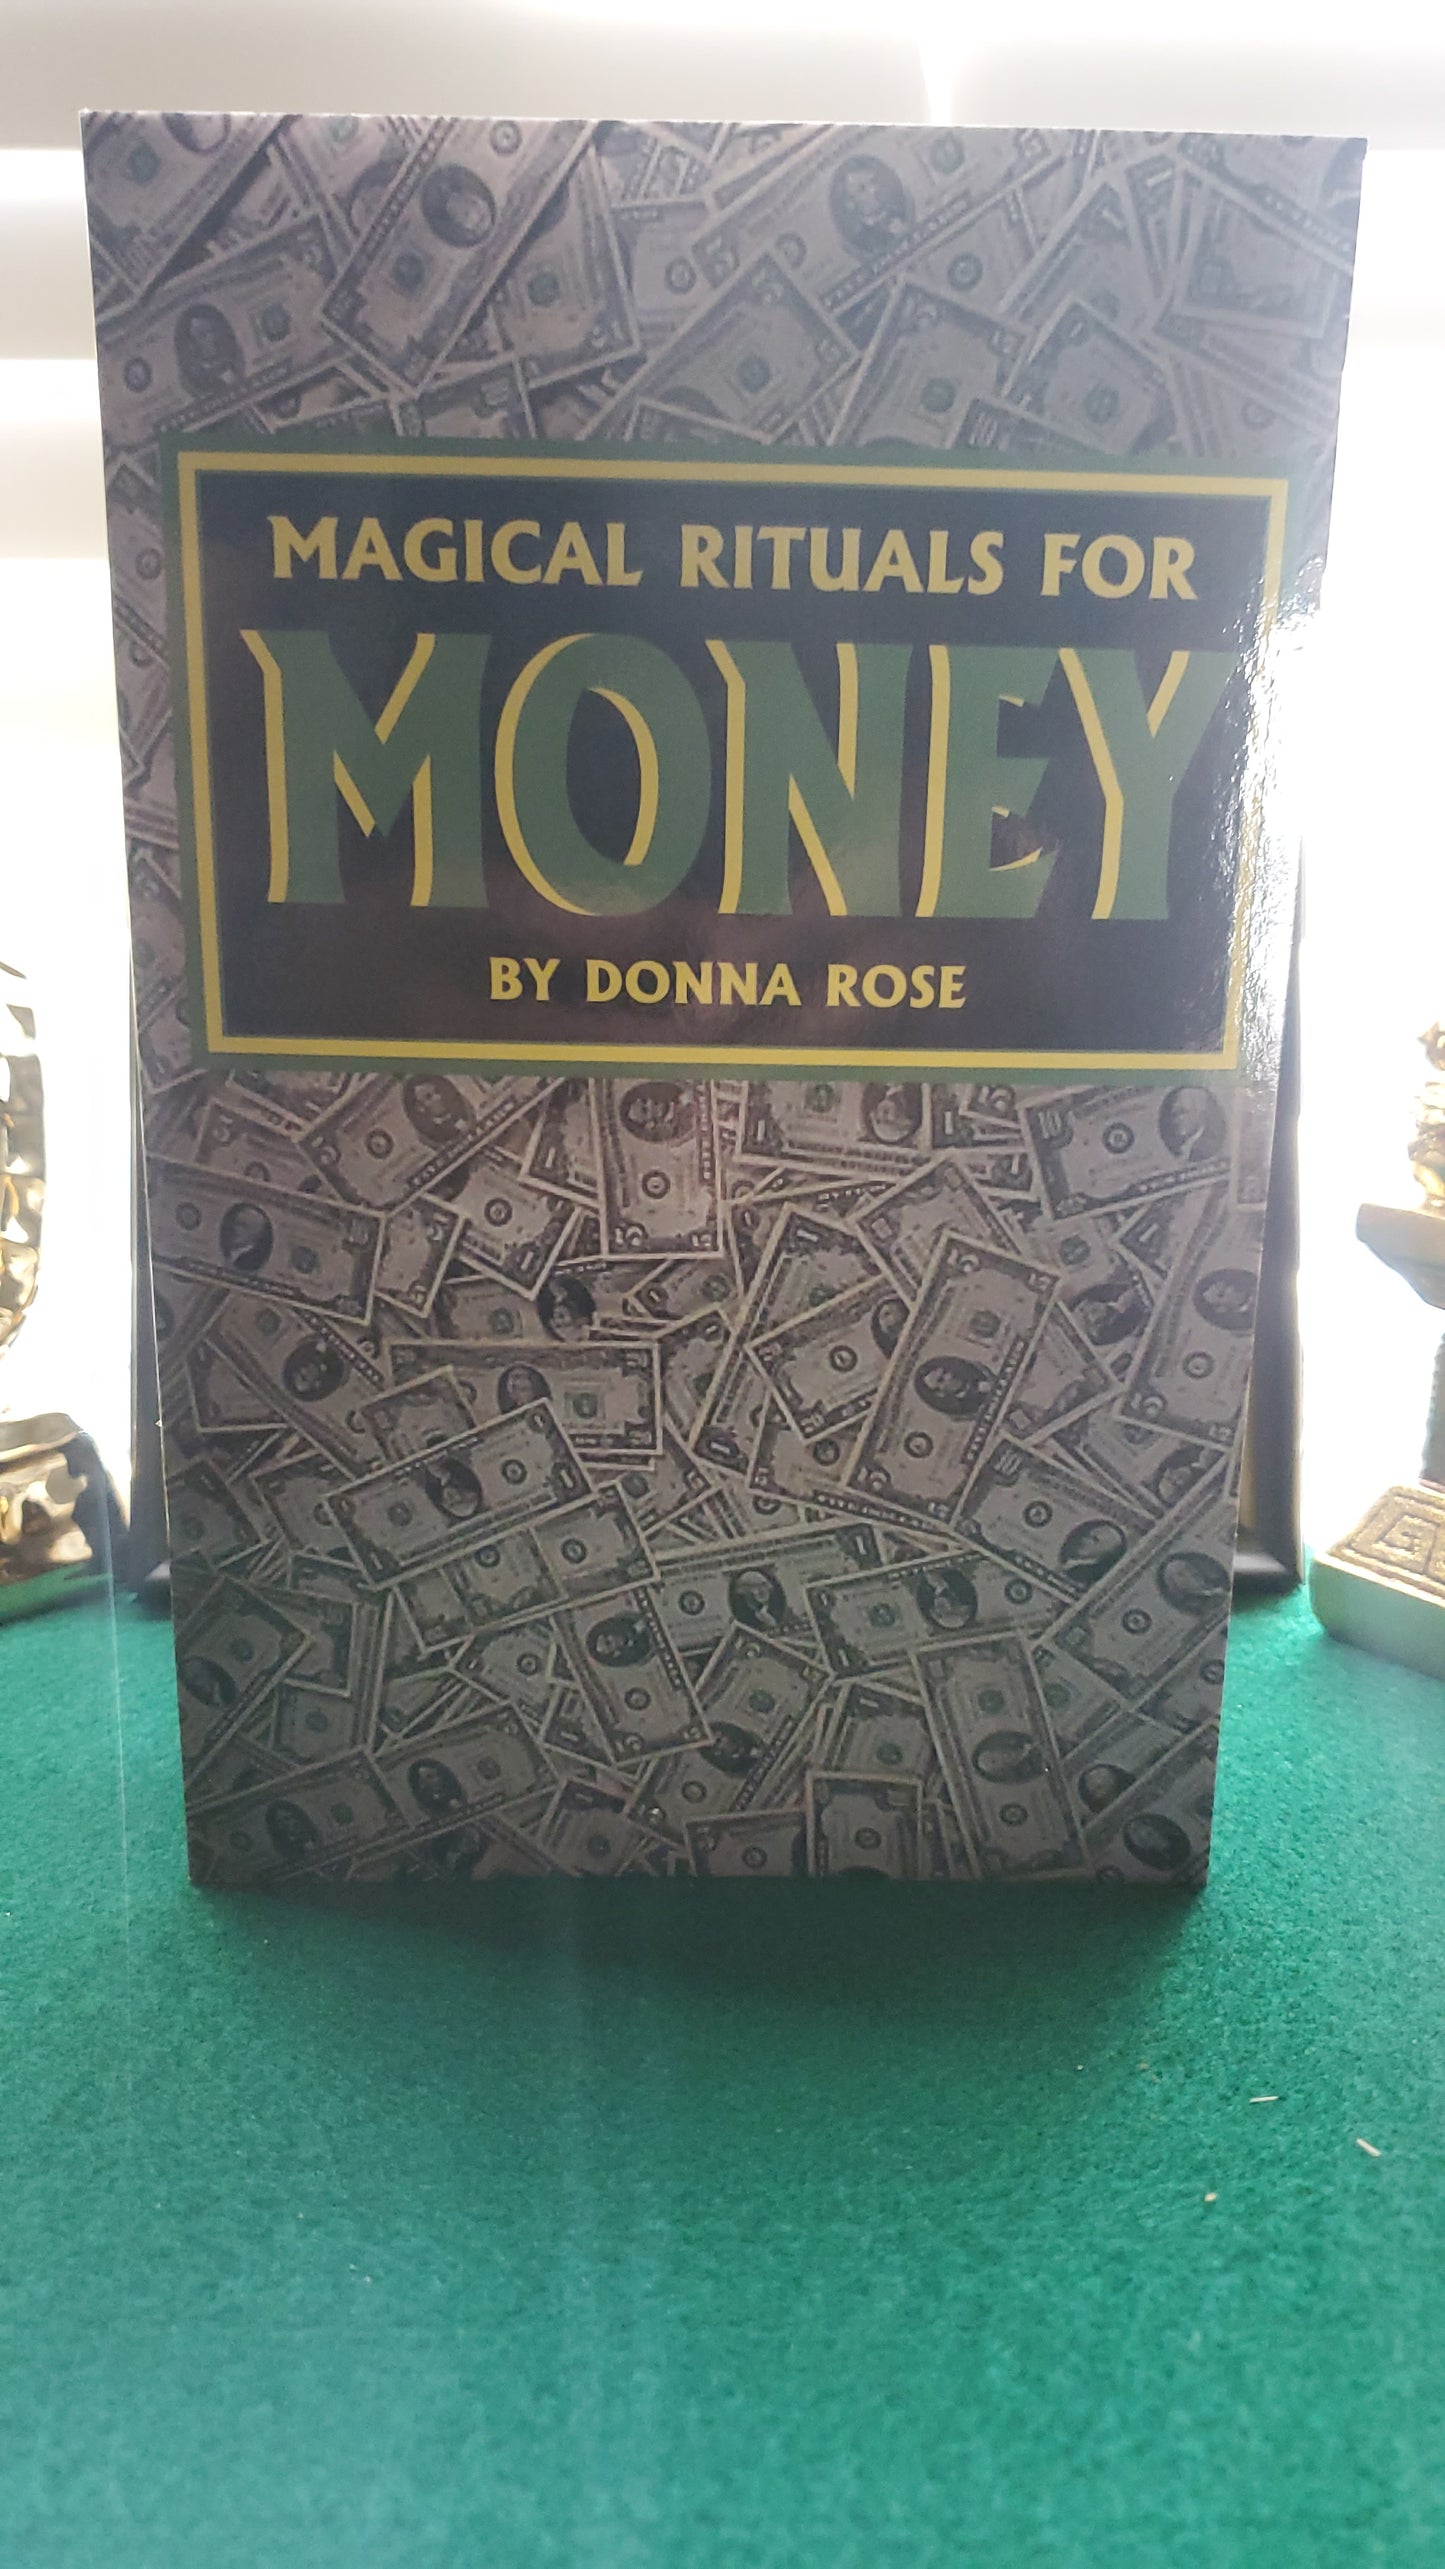 Magical Rituals for Money by Donna Rose #MustHave for #HoodooPractitioners #Hoodoo #Conjure #DonnaRose #MoneyMagick #MoneyDrawing